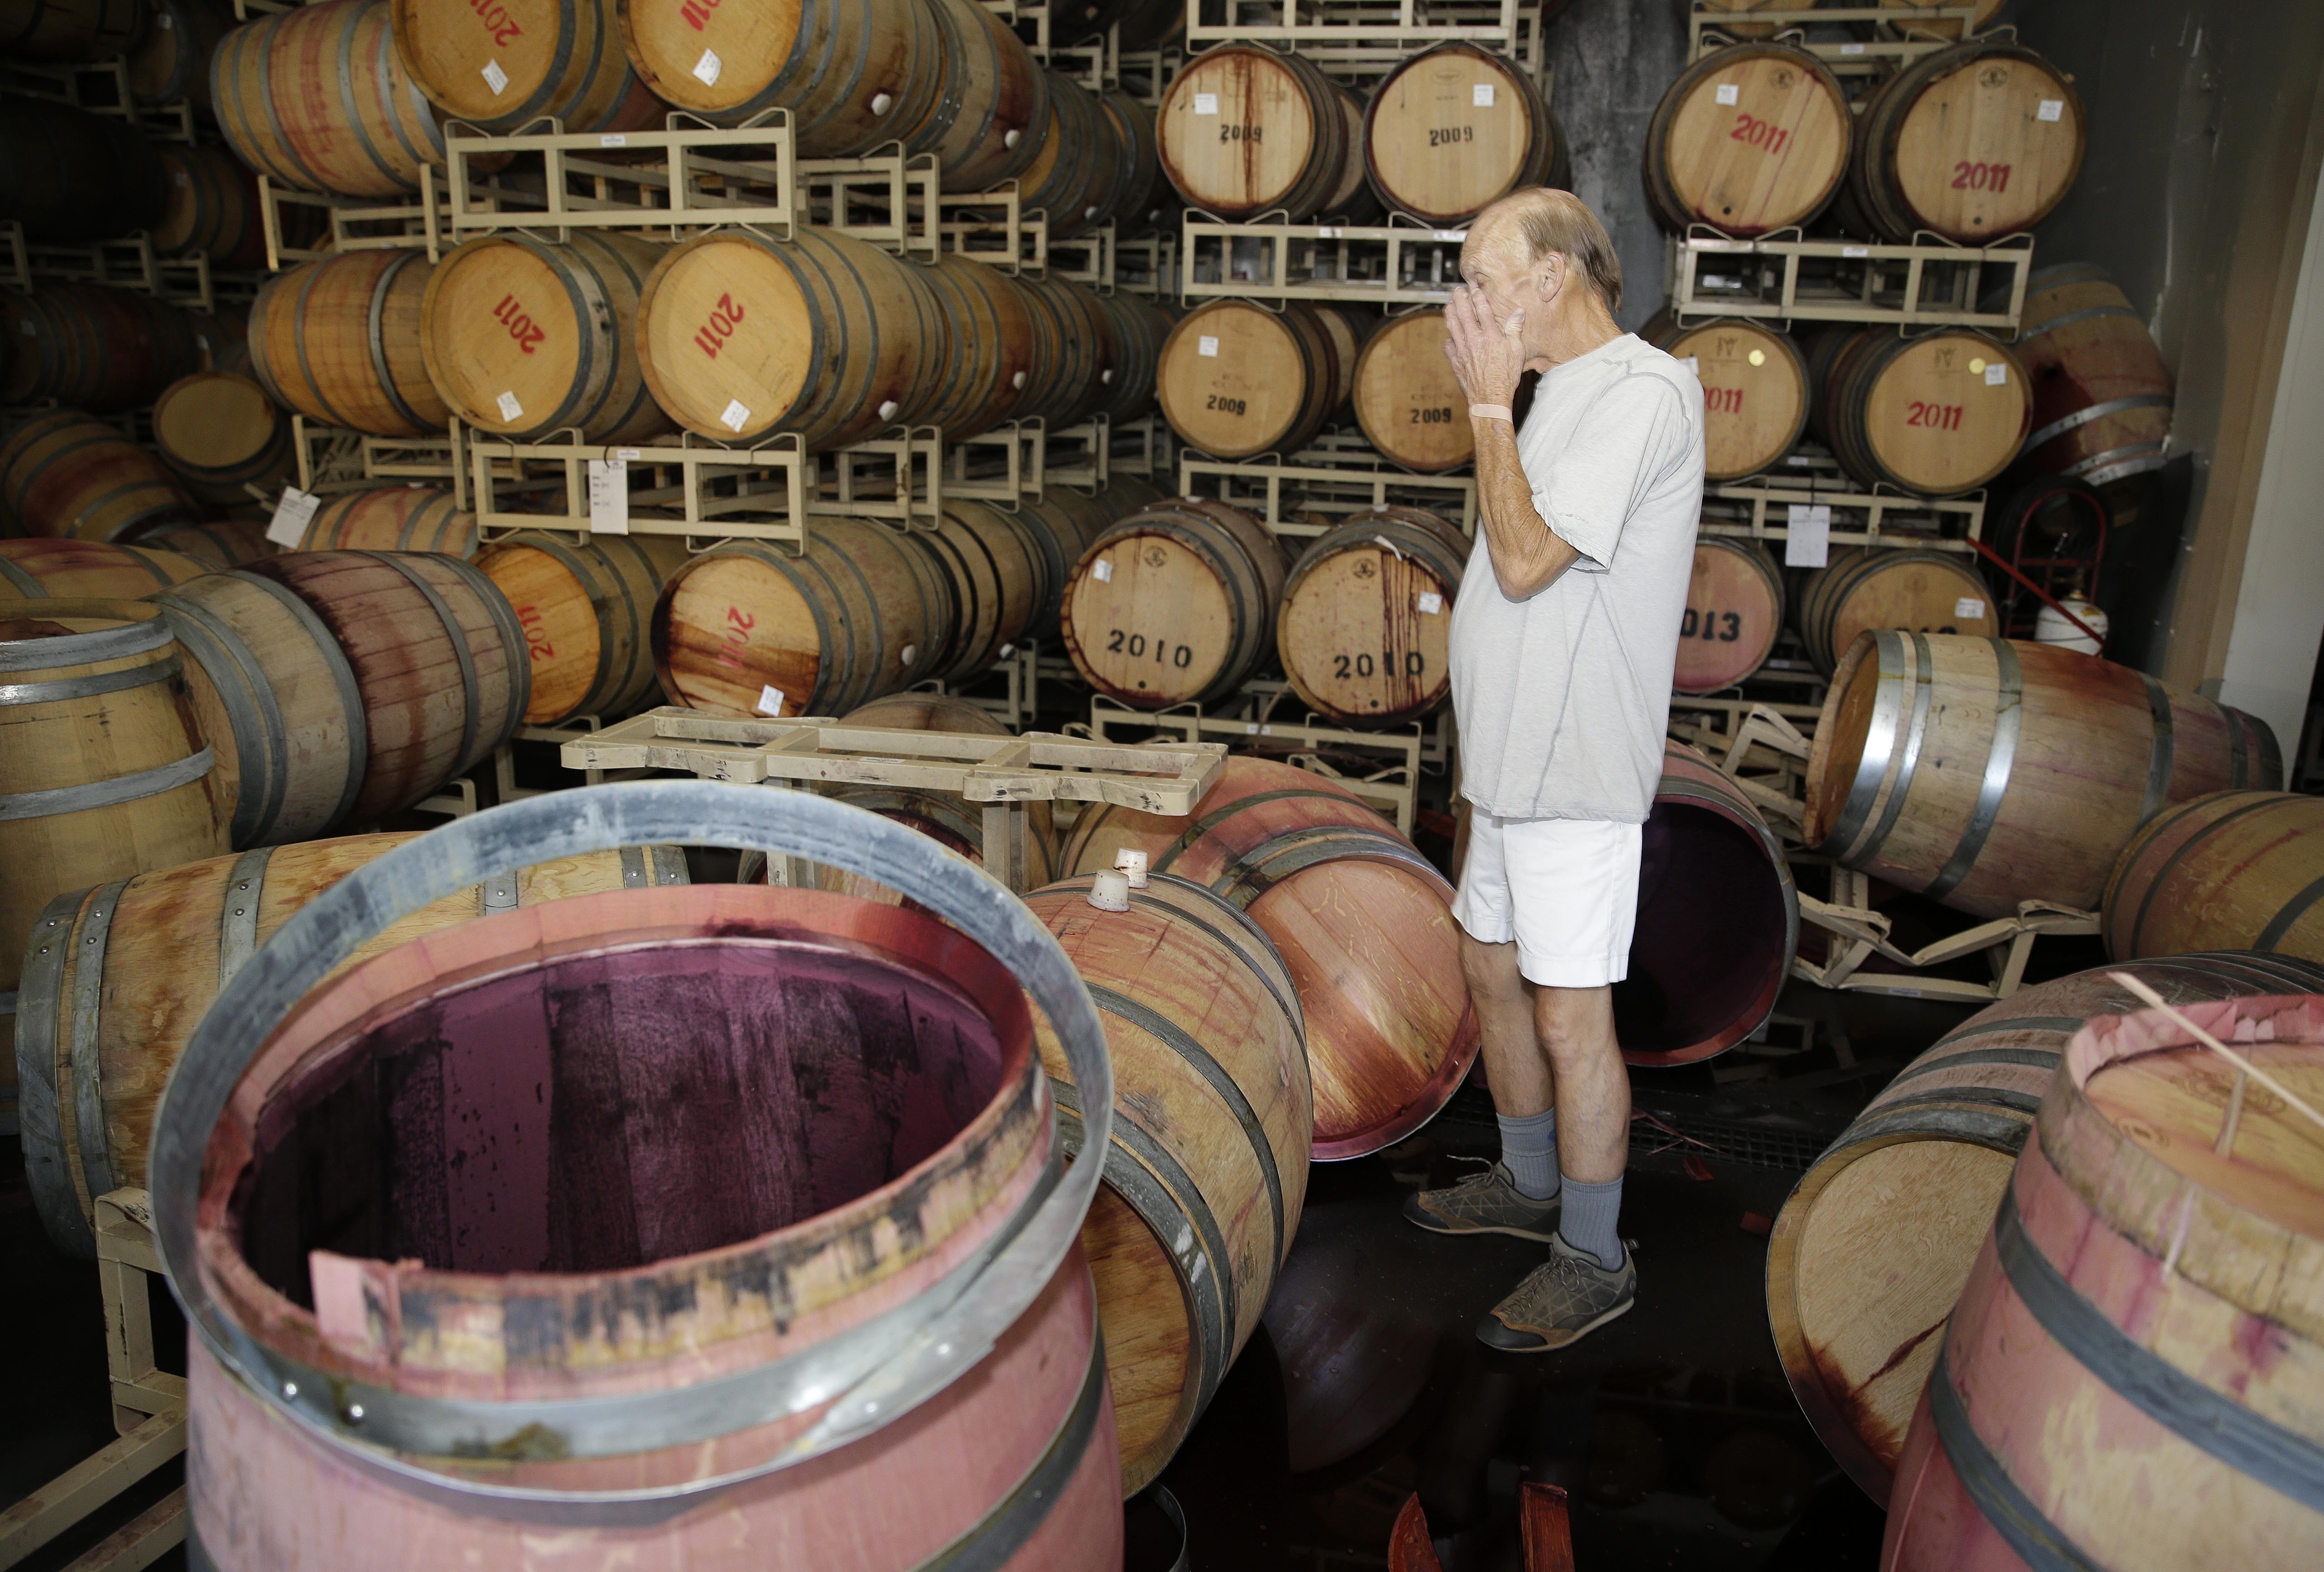 Winemaker Tom Montgomery stands in wine and reacts to seeing damage following an earthquake at the B.R. Cohn Winery barrel storage facility on Sunday in Napa Valley. Photo: Eric Risberg/AP 